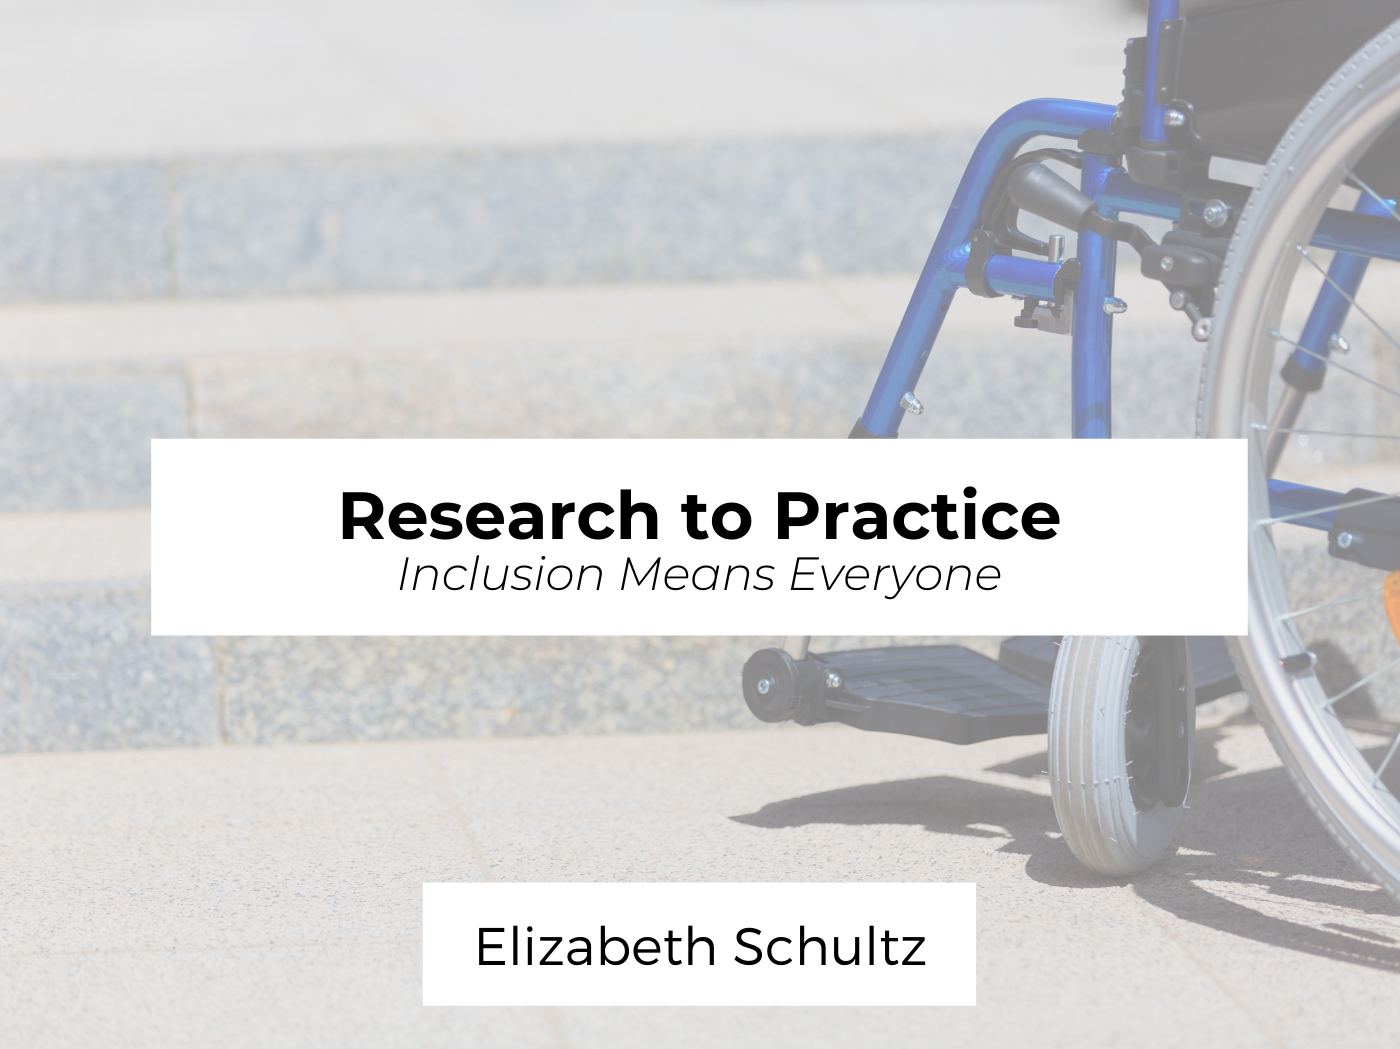 Research to practice ableism